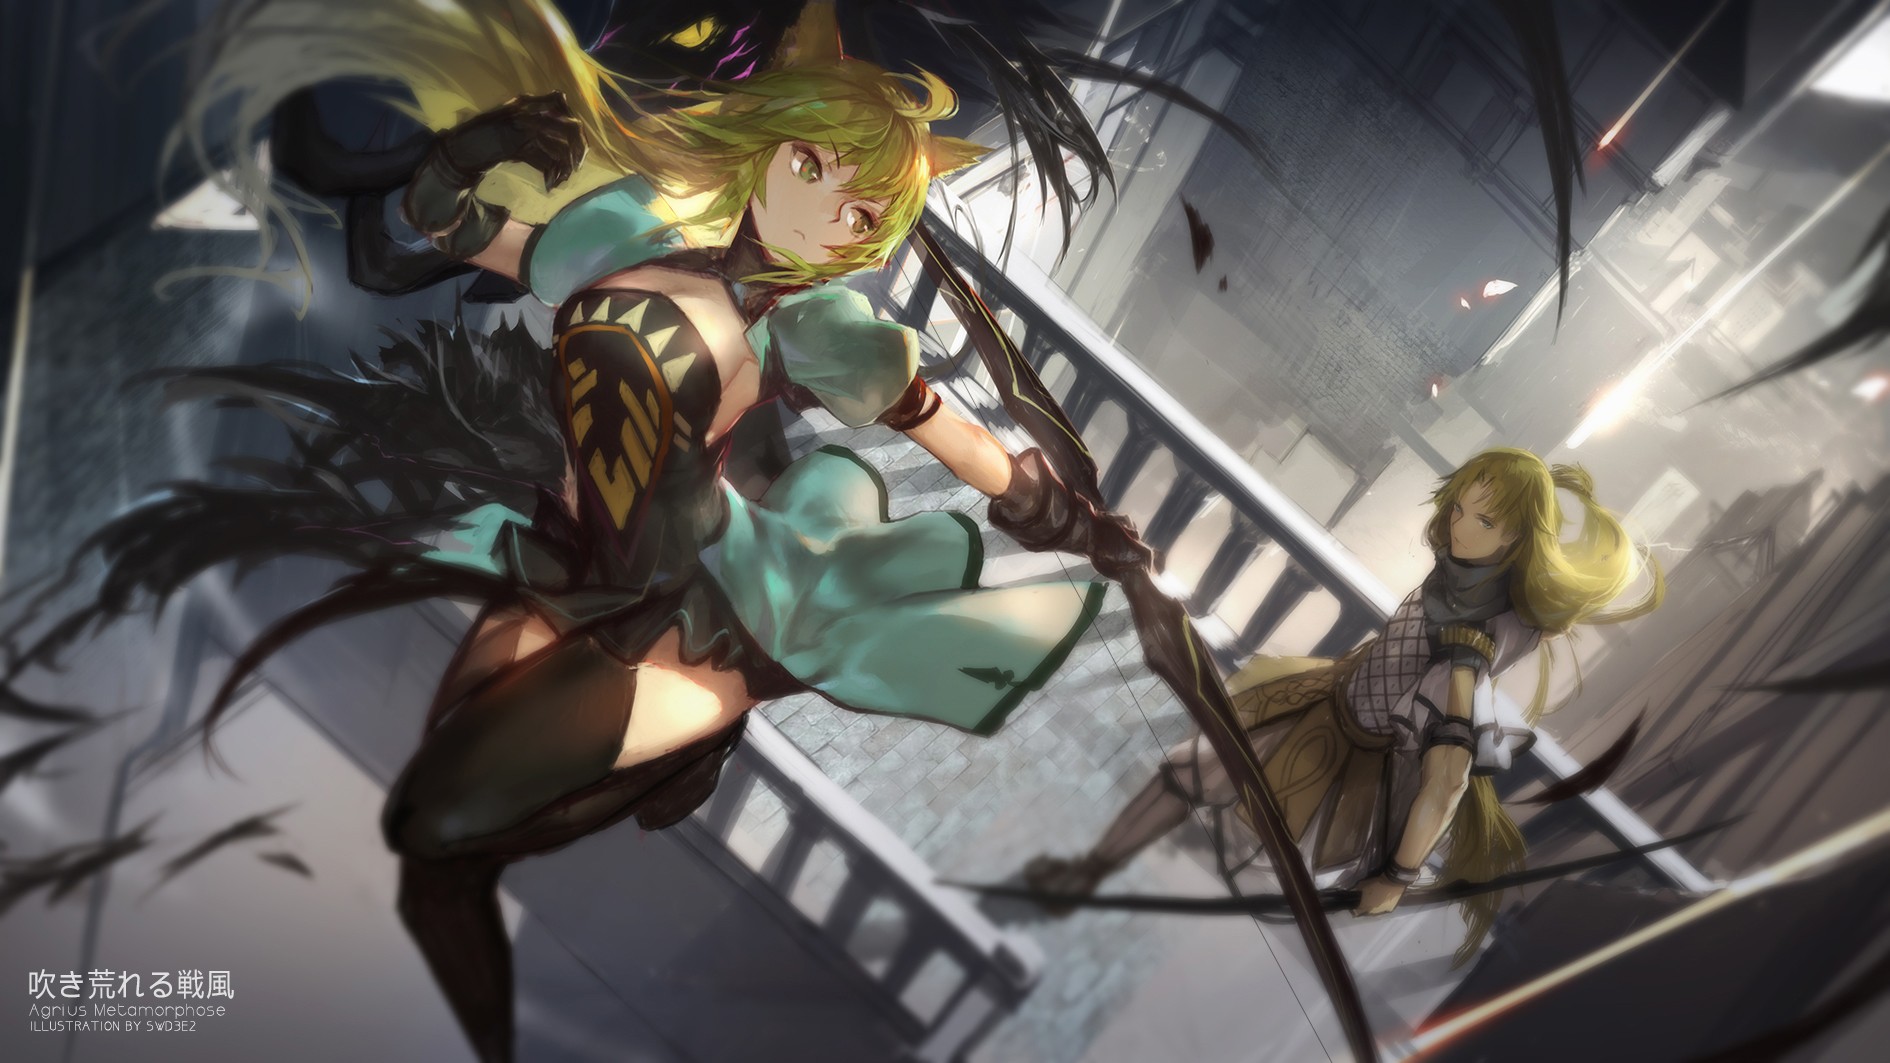 anime Girls, Swd3e2, Fate Apocrypha, Fate Series, Thigh highs, Bow And Arrow, Archer (Fate Apocrypha), Blonde, Animal Ears Wallpaper